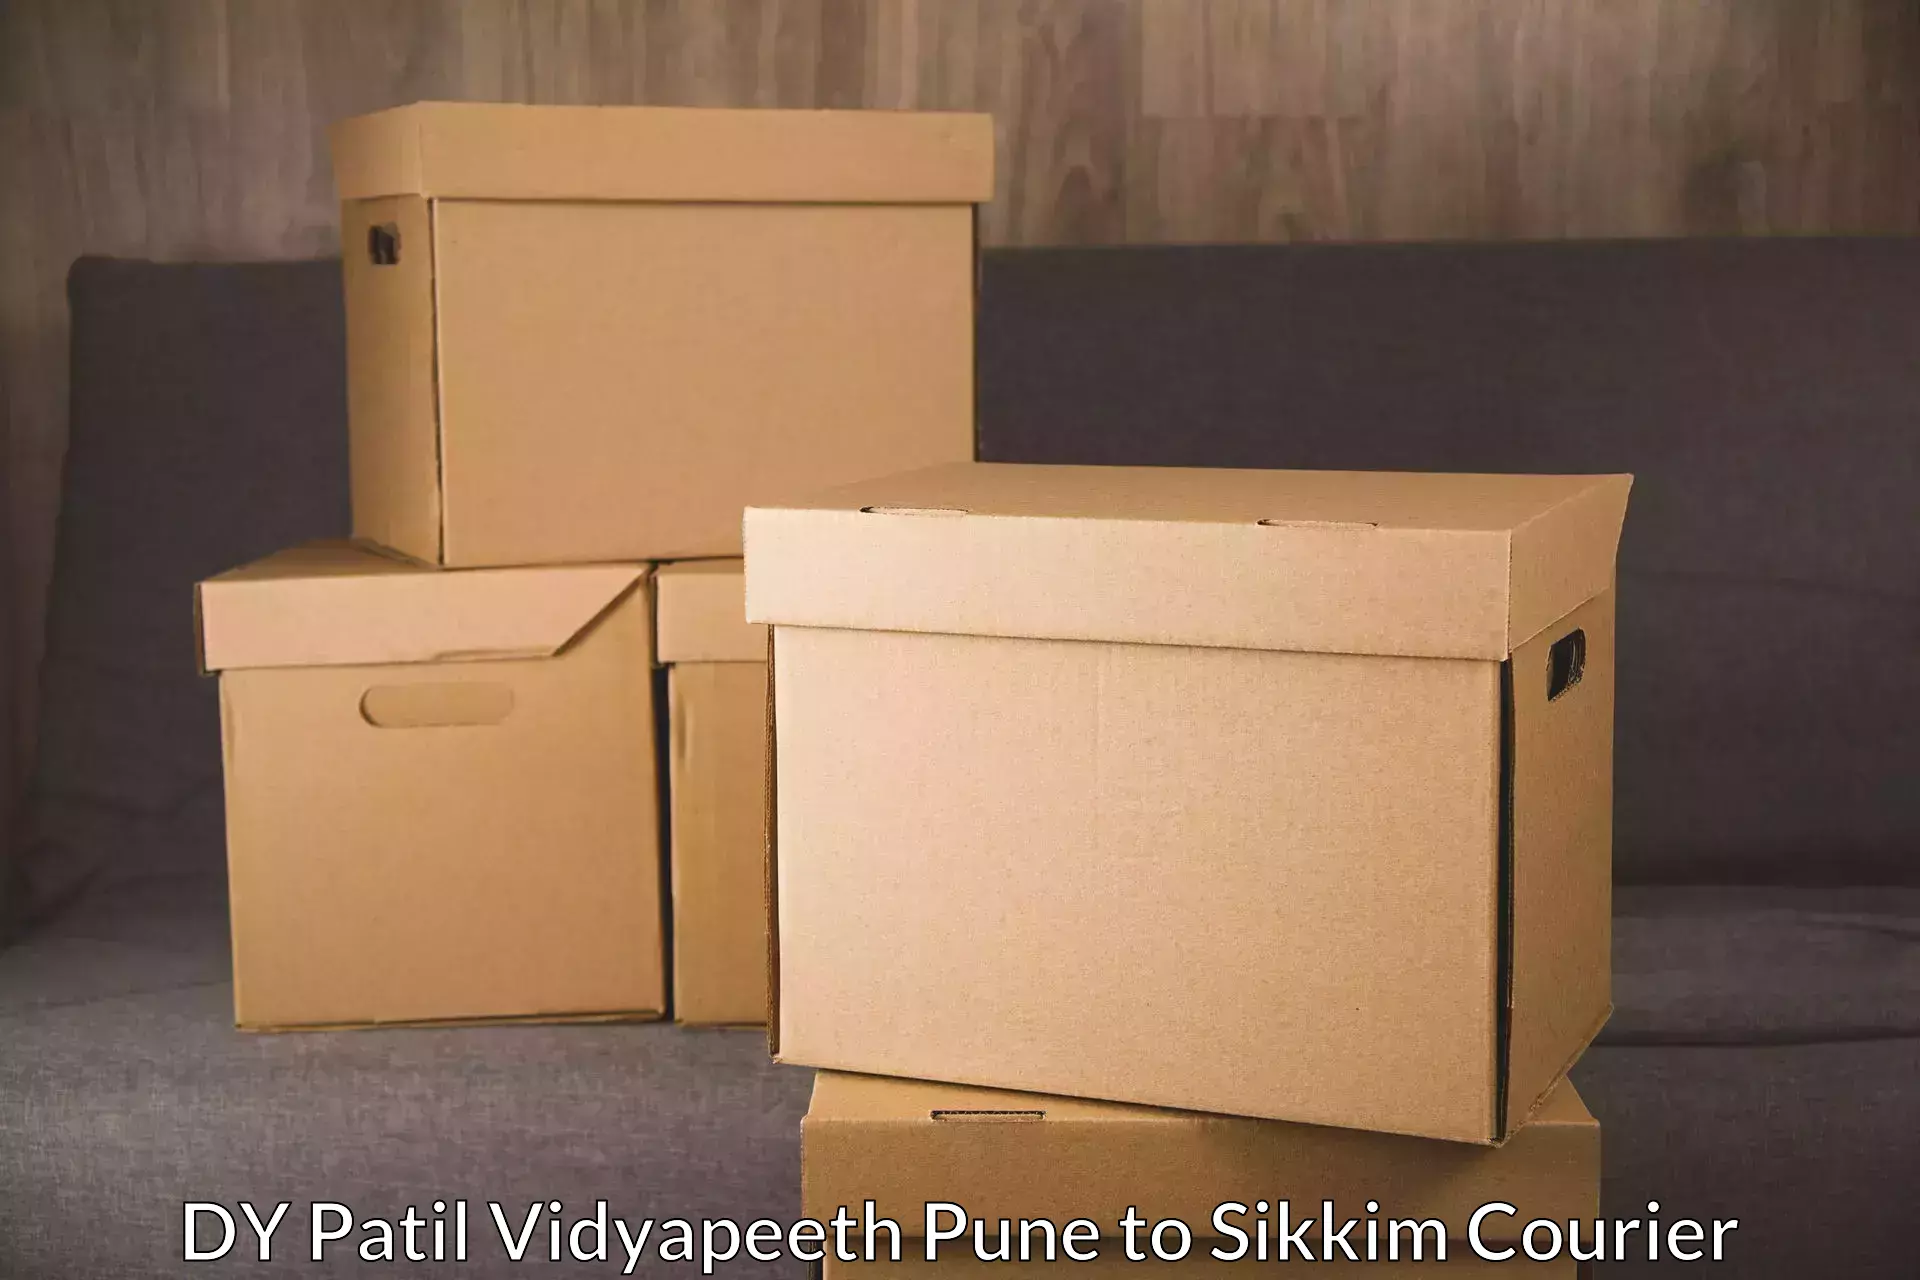 Multi-carrier shipping in DY Patil Vidyapeeth Pune to Geyzing